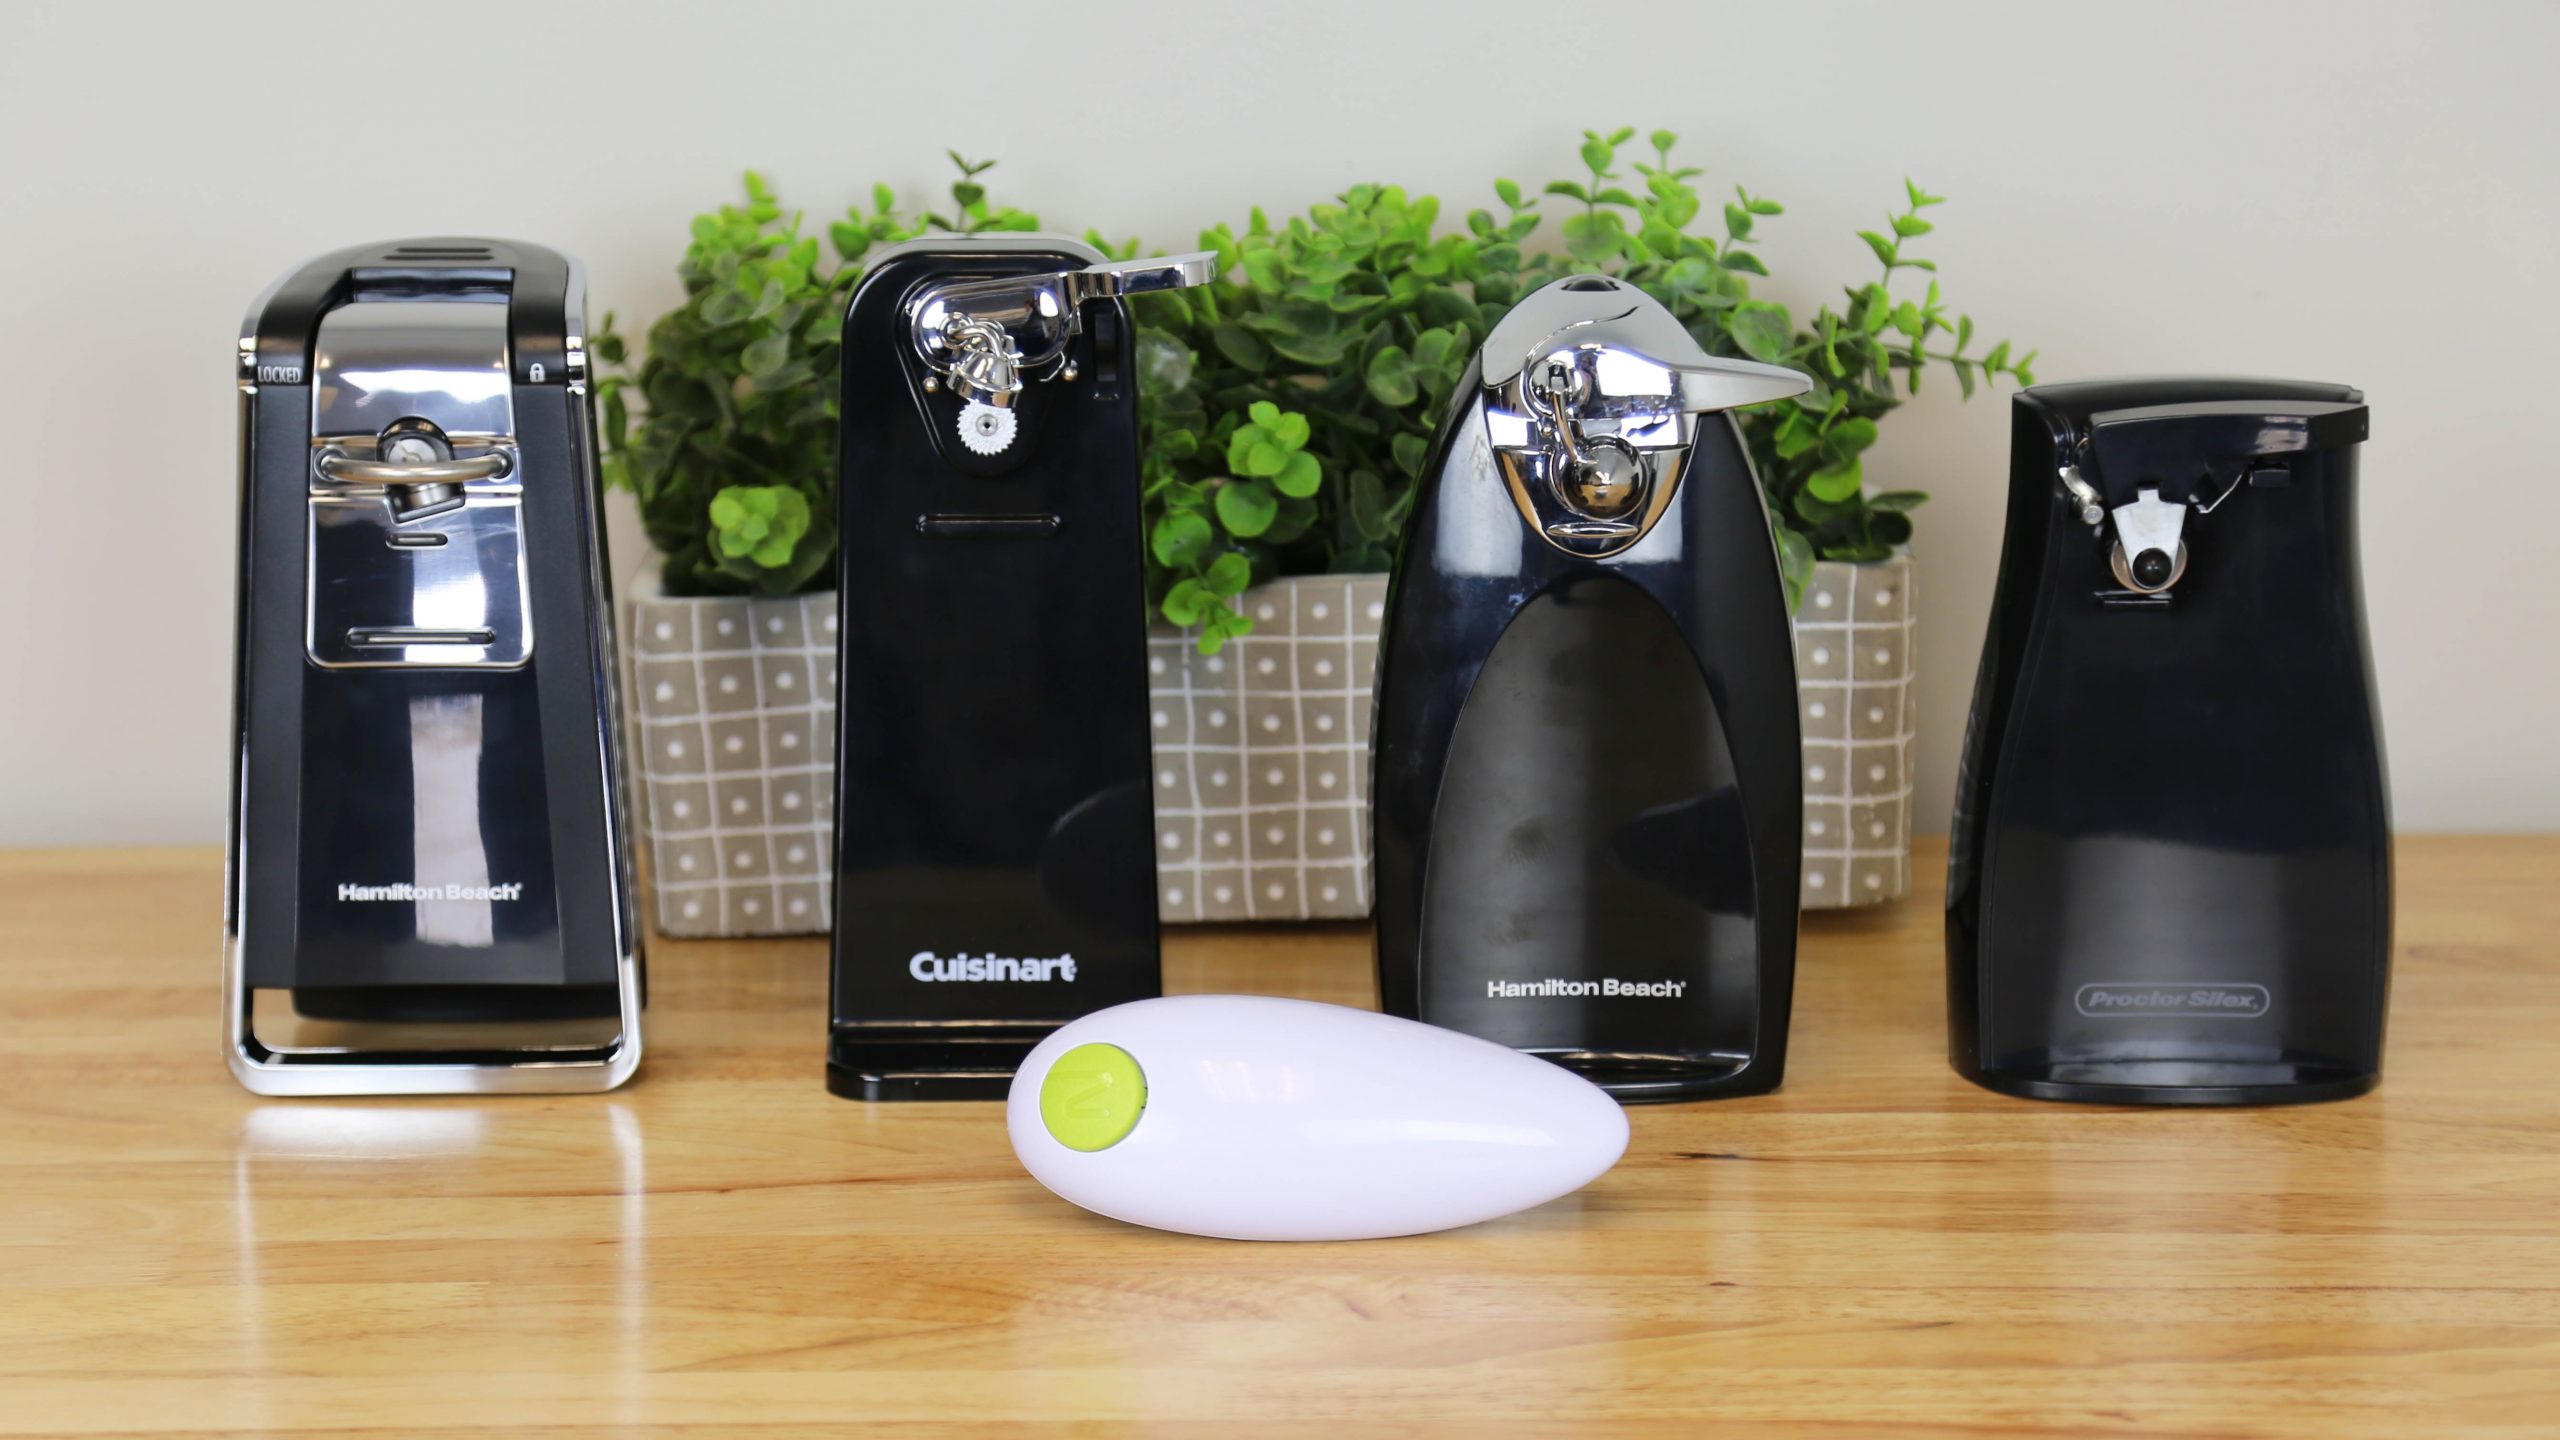 https://www.dontwasteyourmoney.com/wp-content/uploads/2020/02/electric-can-opener-all-review-ub-1-scaled.jpg